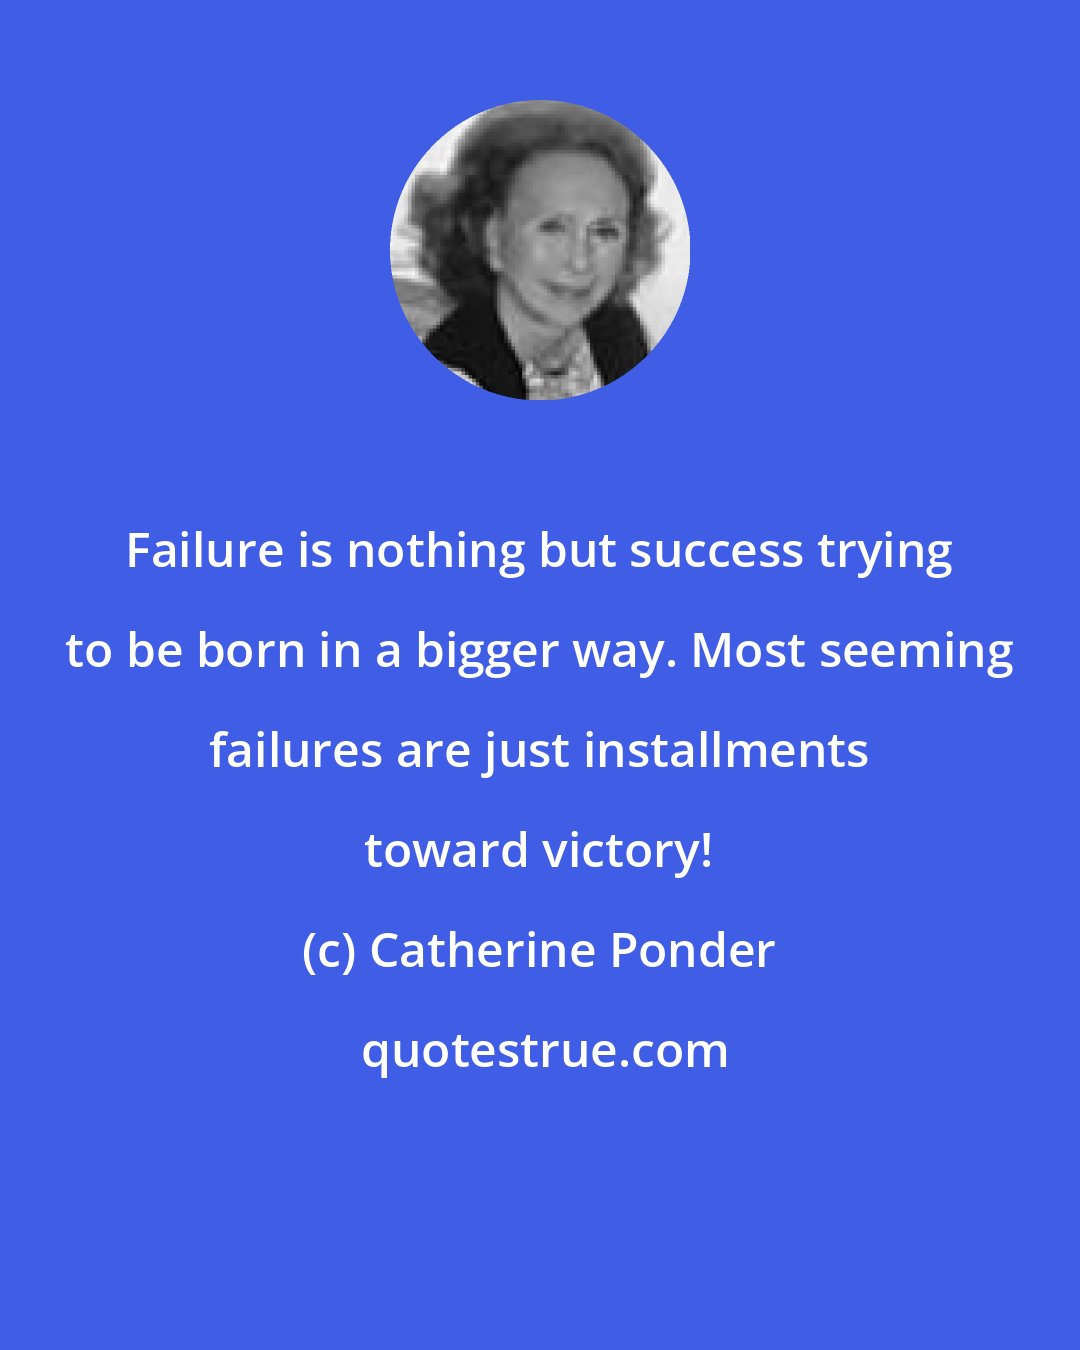 Catherine Ponder: Failure is nothing but success trying to be born in a bigger way. Most seeming failures are just installments toward victory!